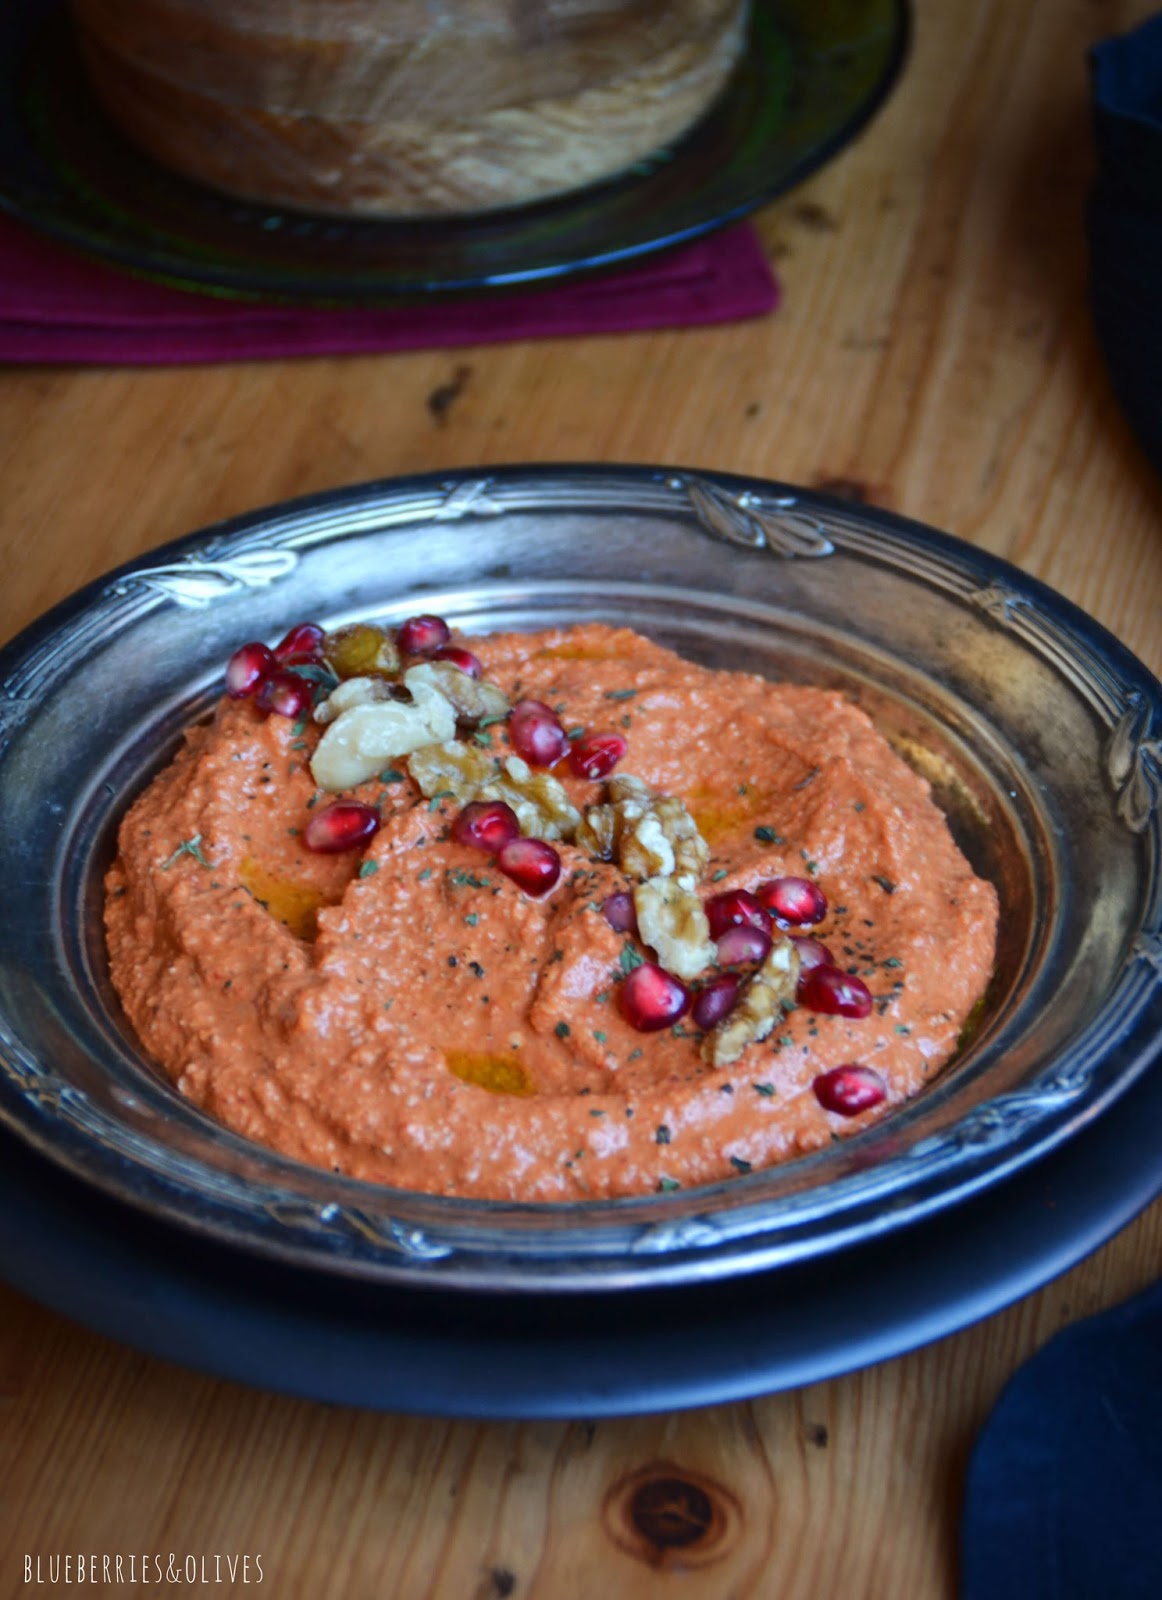 MUHAMMARA, SYRIAN DIP WITH PEPPERS AND WALNUTS